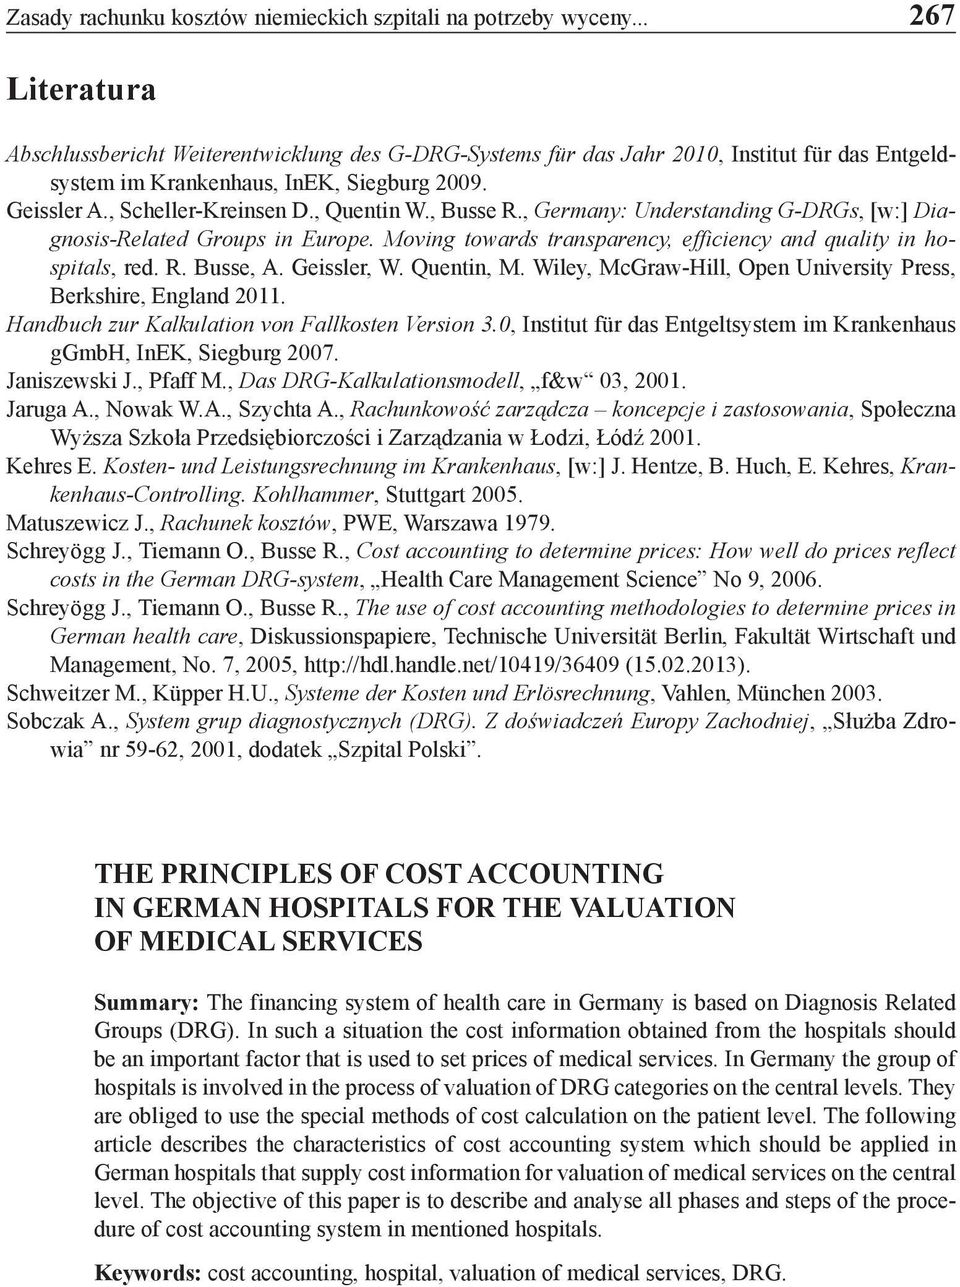 , Quentin W., Busse R., Germany: Understanding G-DRGs, [w:] Diagnosis-Related Groups in Europe. Moving towards transparency, efficiency and quality in hospitals, red. R. Busse, A. Geissler, W.